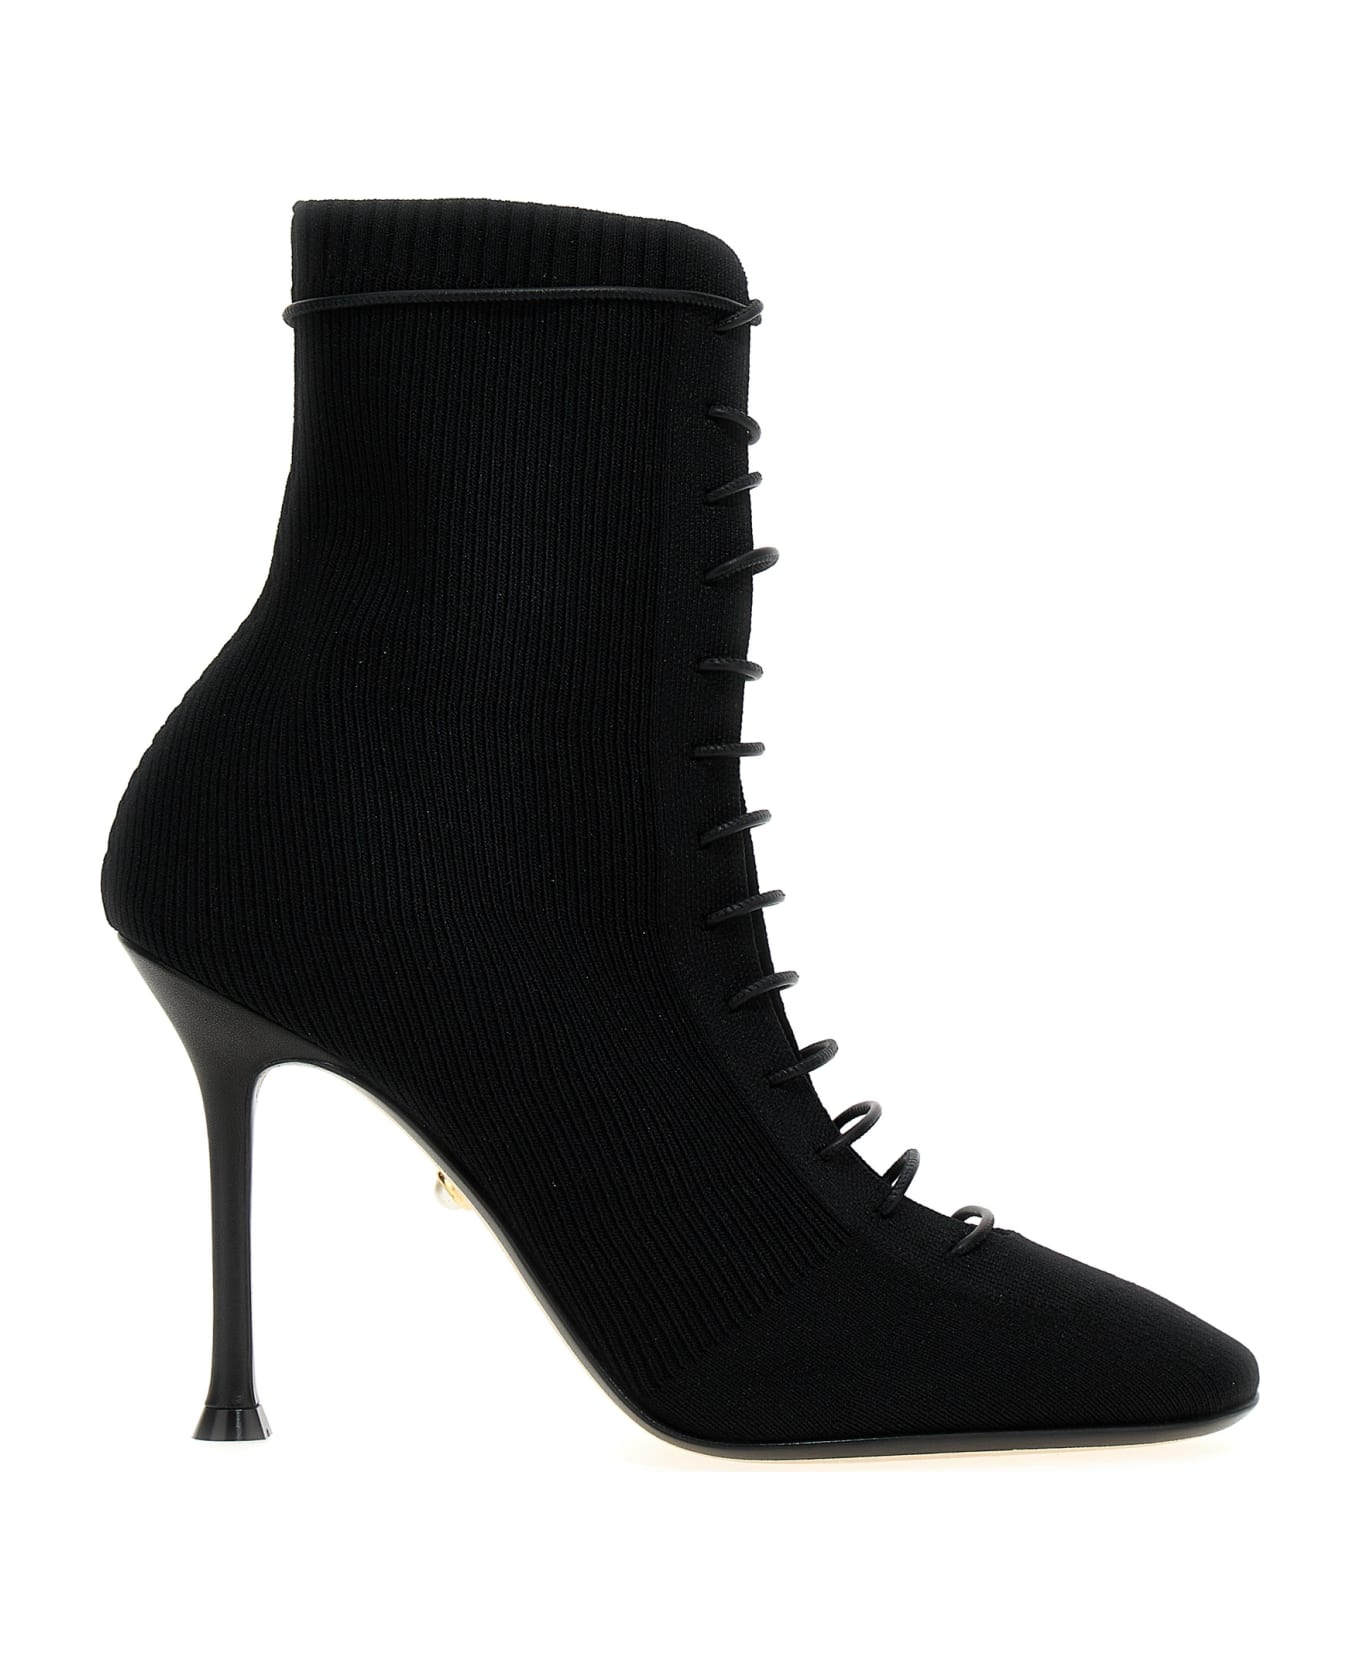 Alevì 'love' Ankle Boots - Black   ブーツ